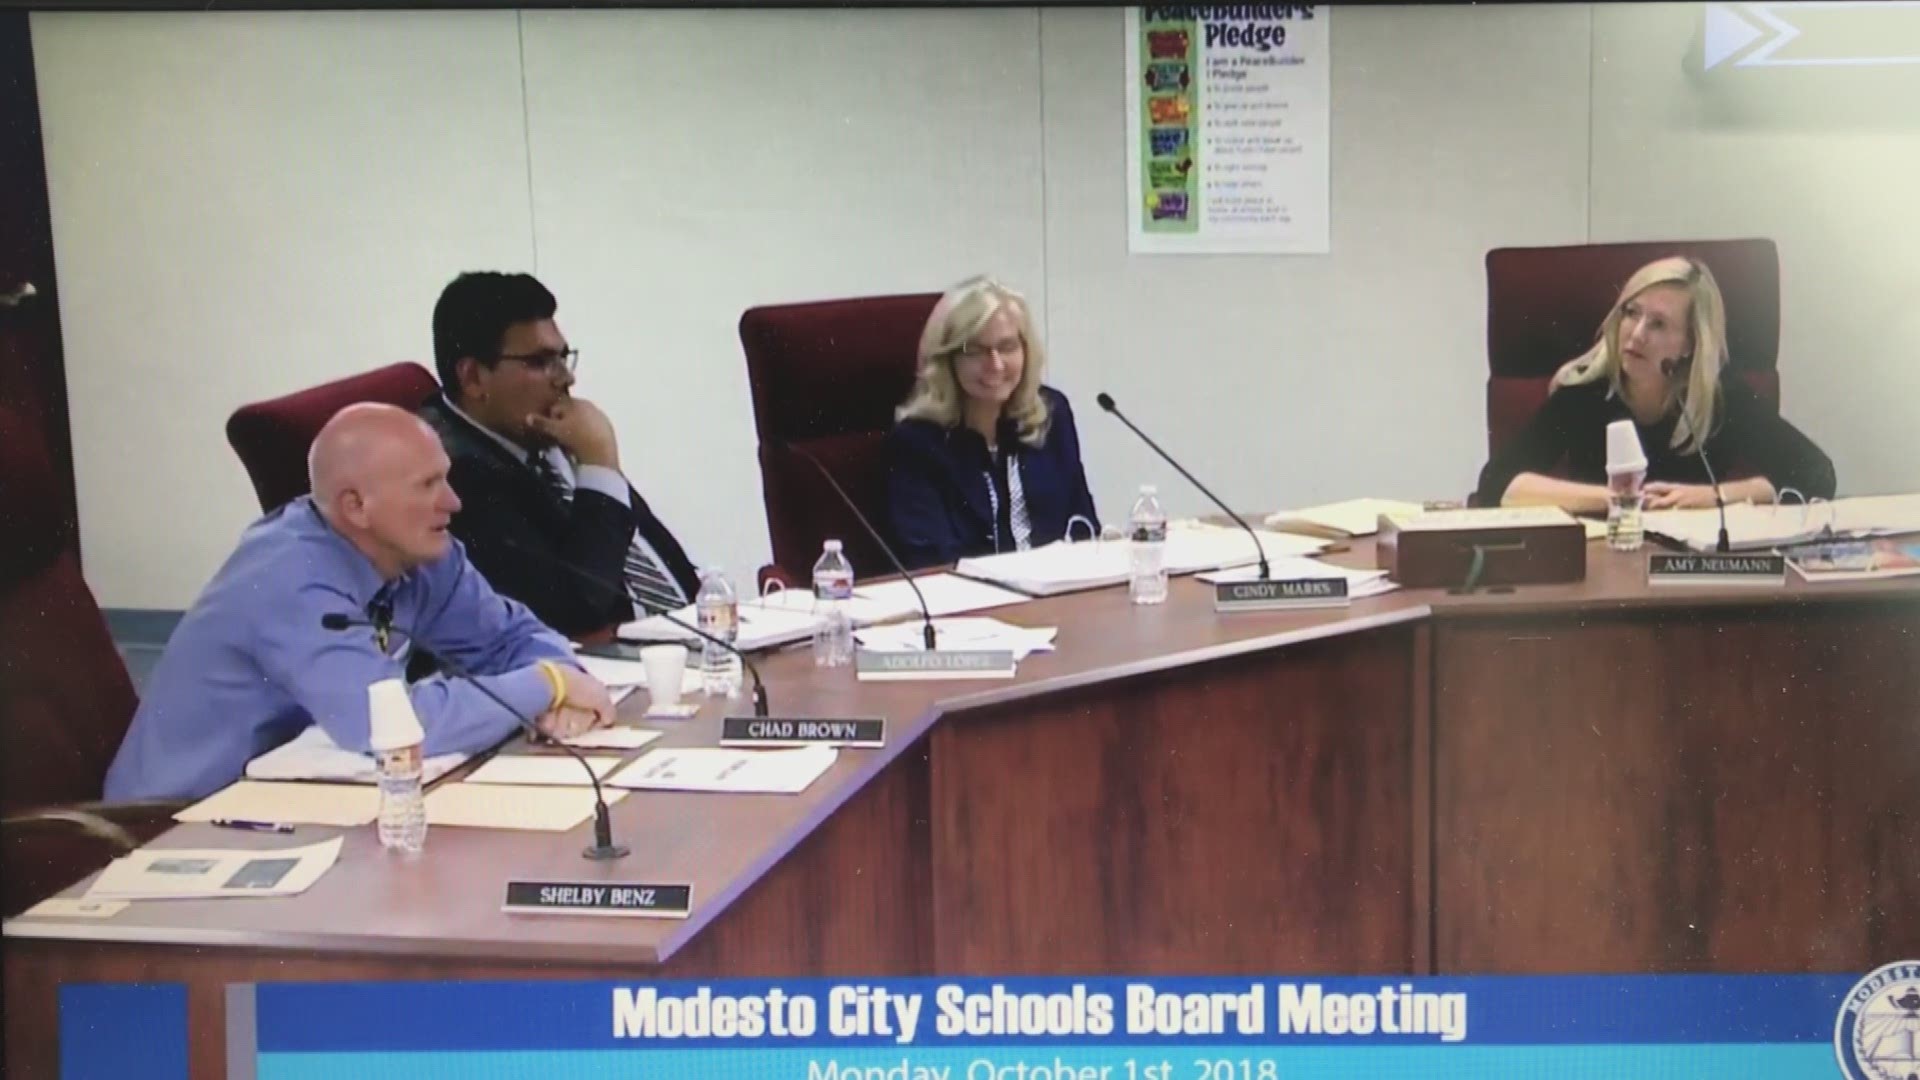 The Modesto City School Board is discussing rule changes for board members when speaking to the media.